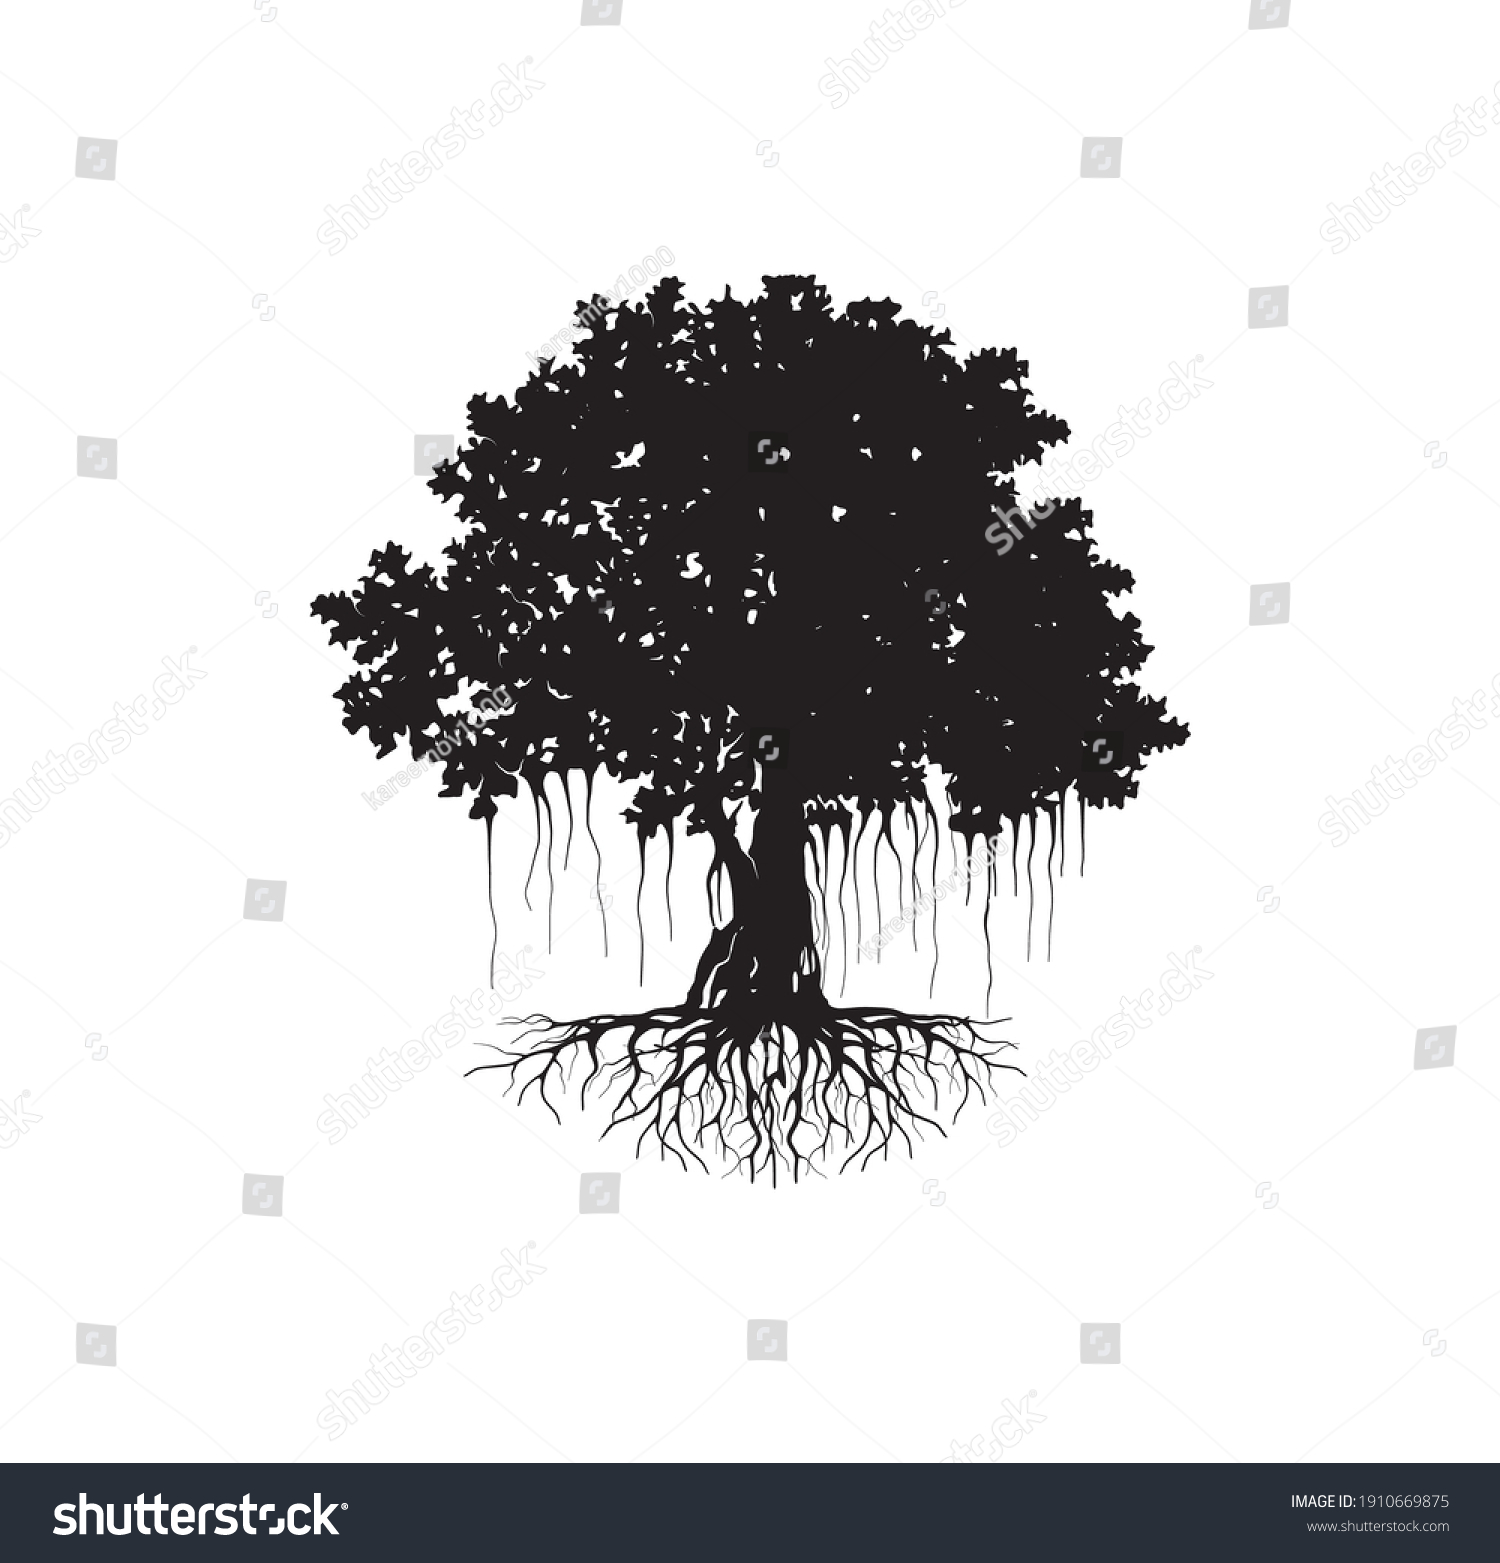 SVG of Banyan tree vector silhouette with black on white svg